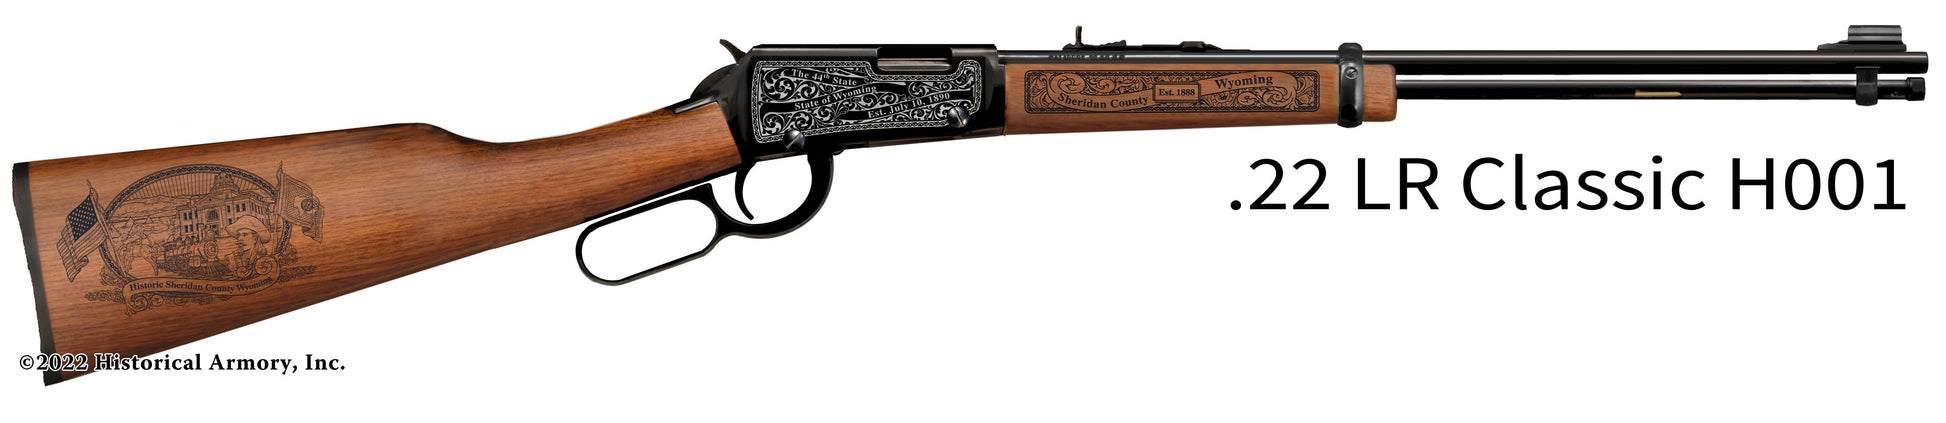 Sheridan County Wyoming Engraved Henry H001 Rifle